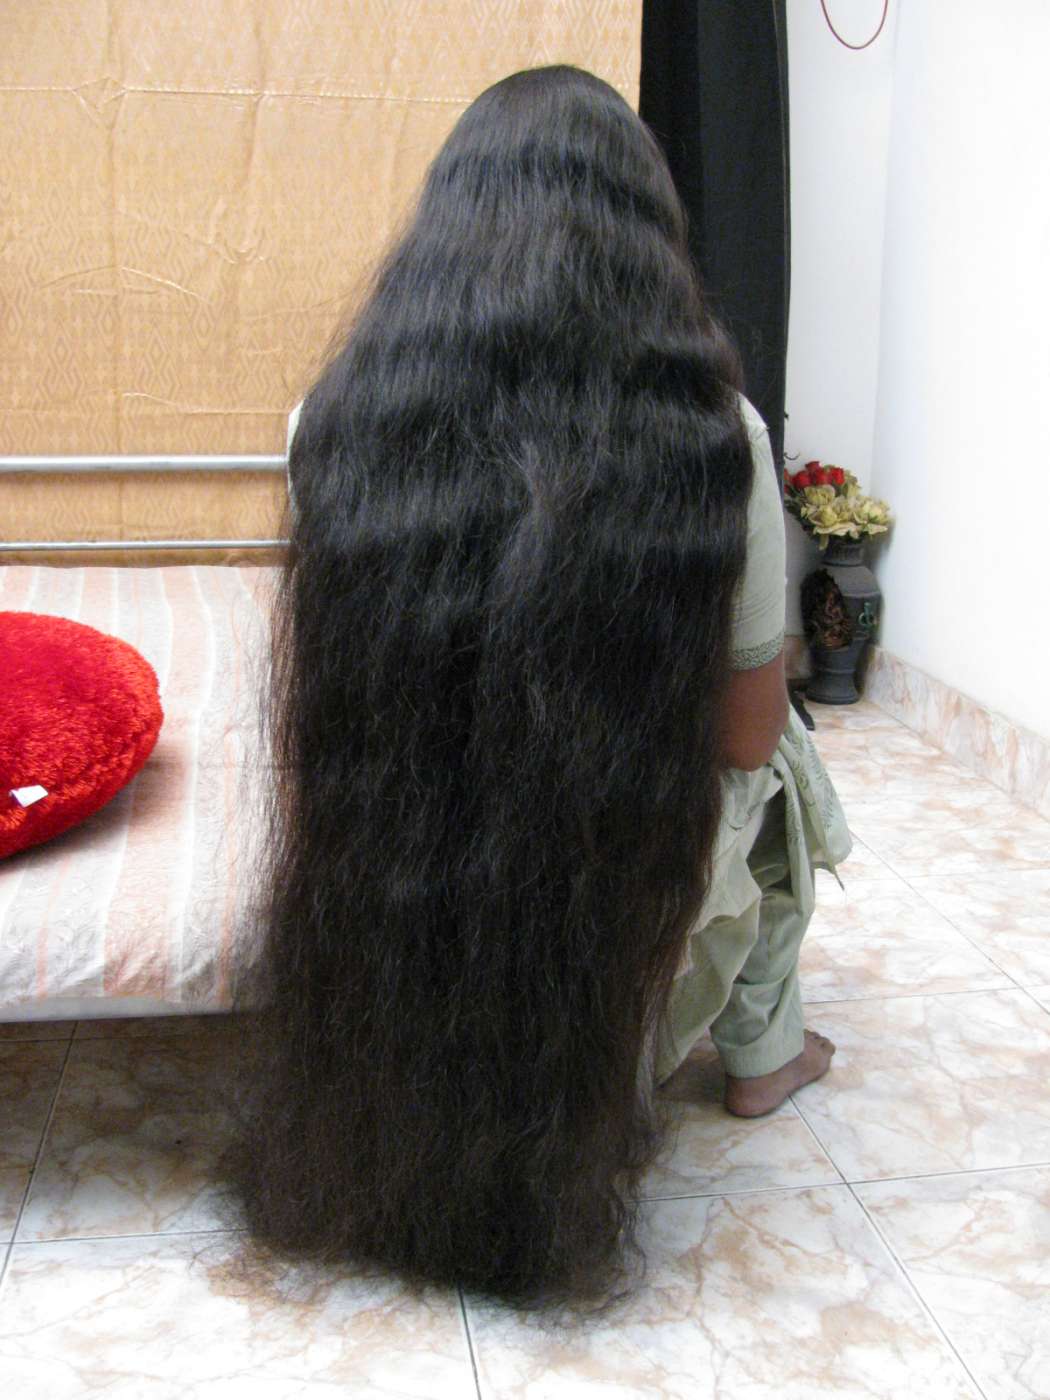 X 上的indianrapunzels：「GET 4 LONG HAIR VIDEOS FREE Apply coupon lh4 at cart  t.cosA4bYZs9UF #hair #longhair #longhairfetish  t.coA9gsP0HuyI」  X